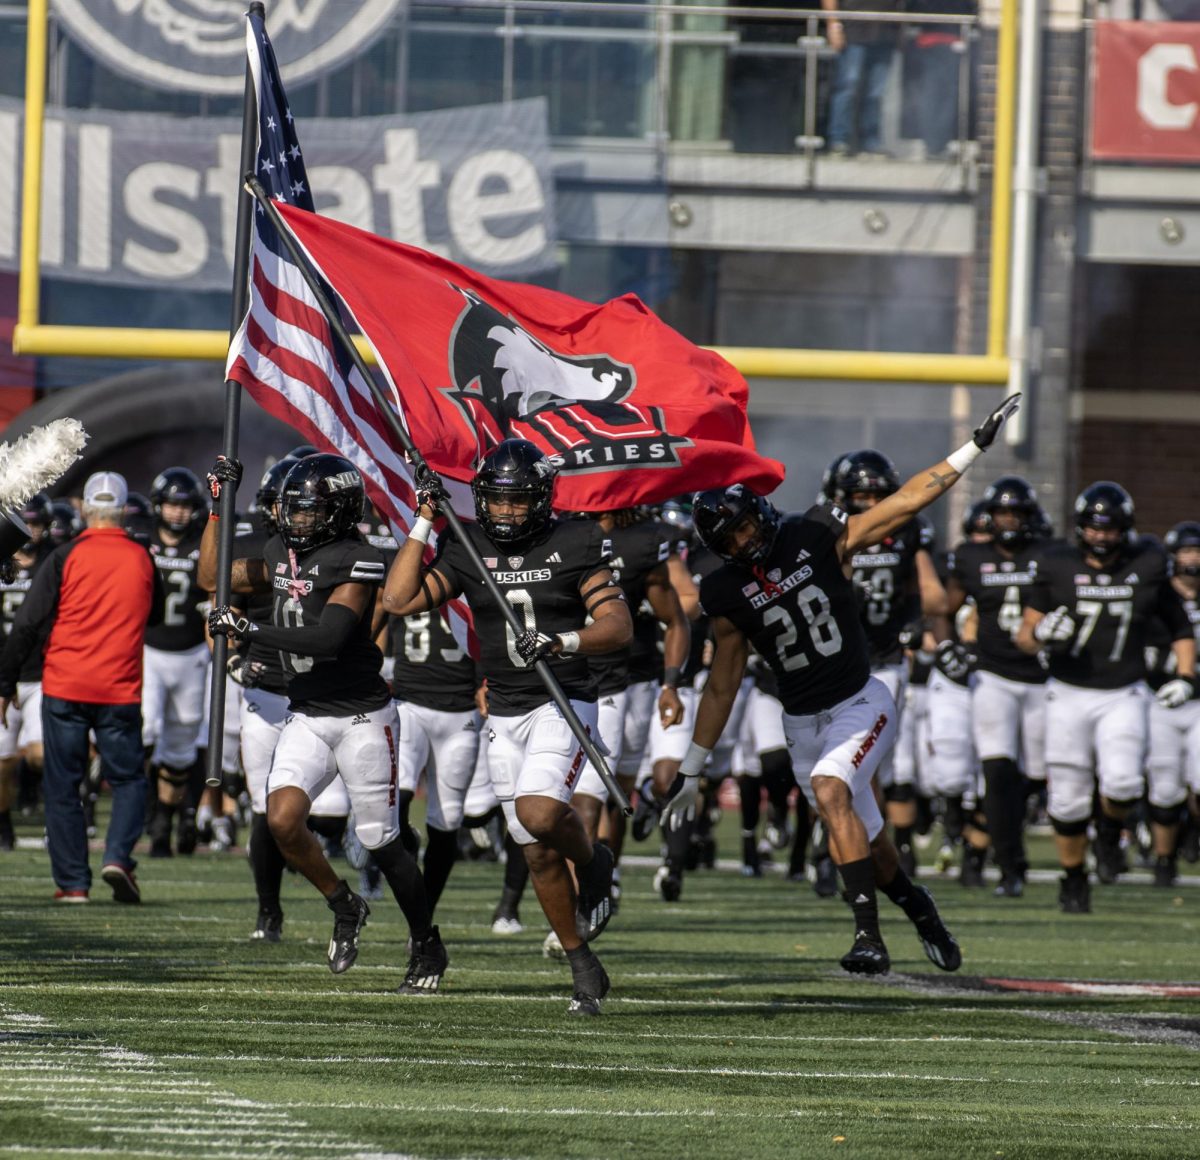 Redshirt senior Tyler Jackson (0) holds the NIU flag as he leads the team onto the Huskie Stadium field on Oct. 21. The Huskies will take on Arkansas State in the Camellia Bowl on Dec. 23. (Tim Dodge | Northern Star)